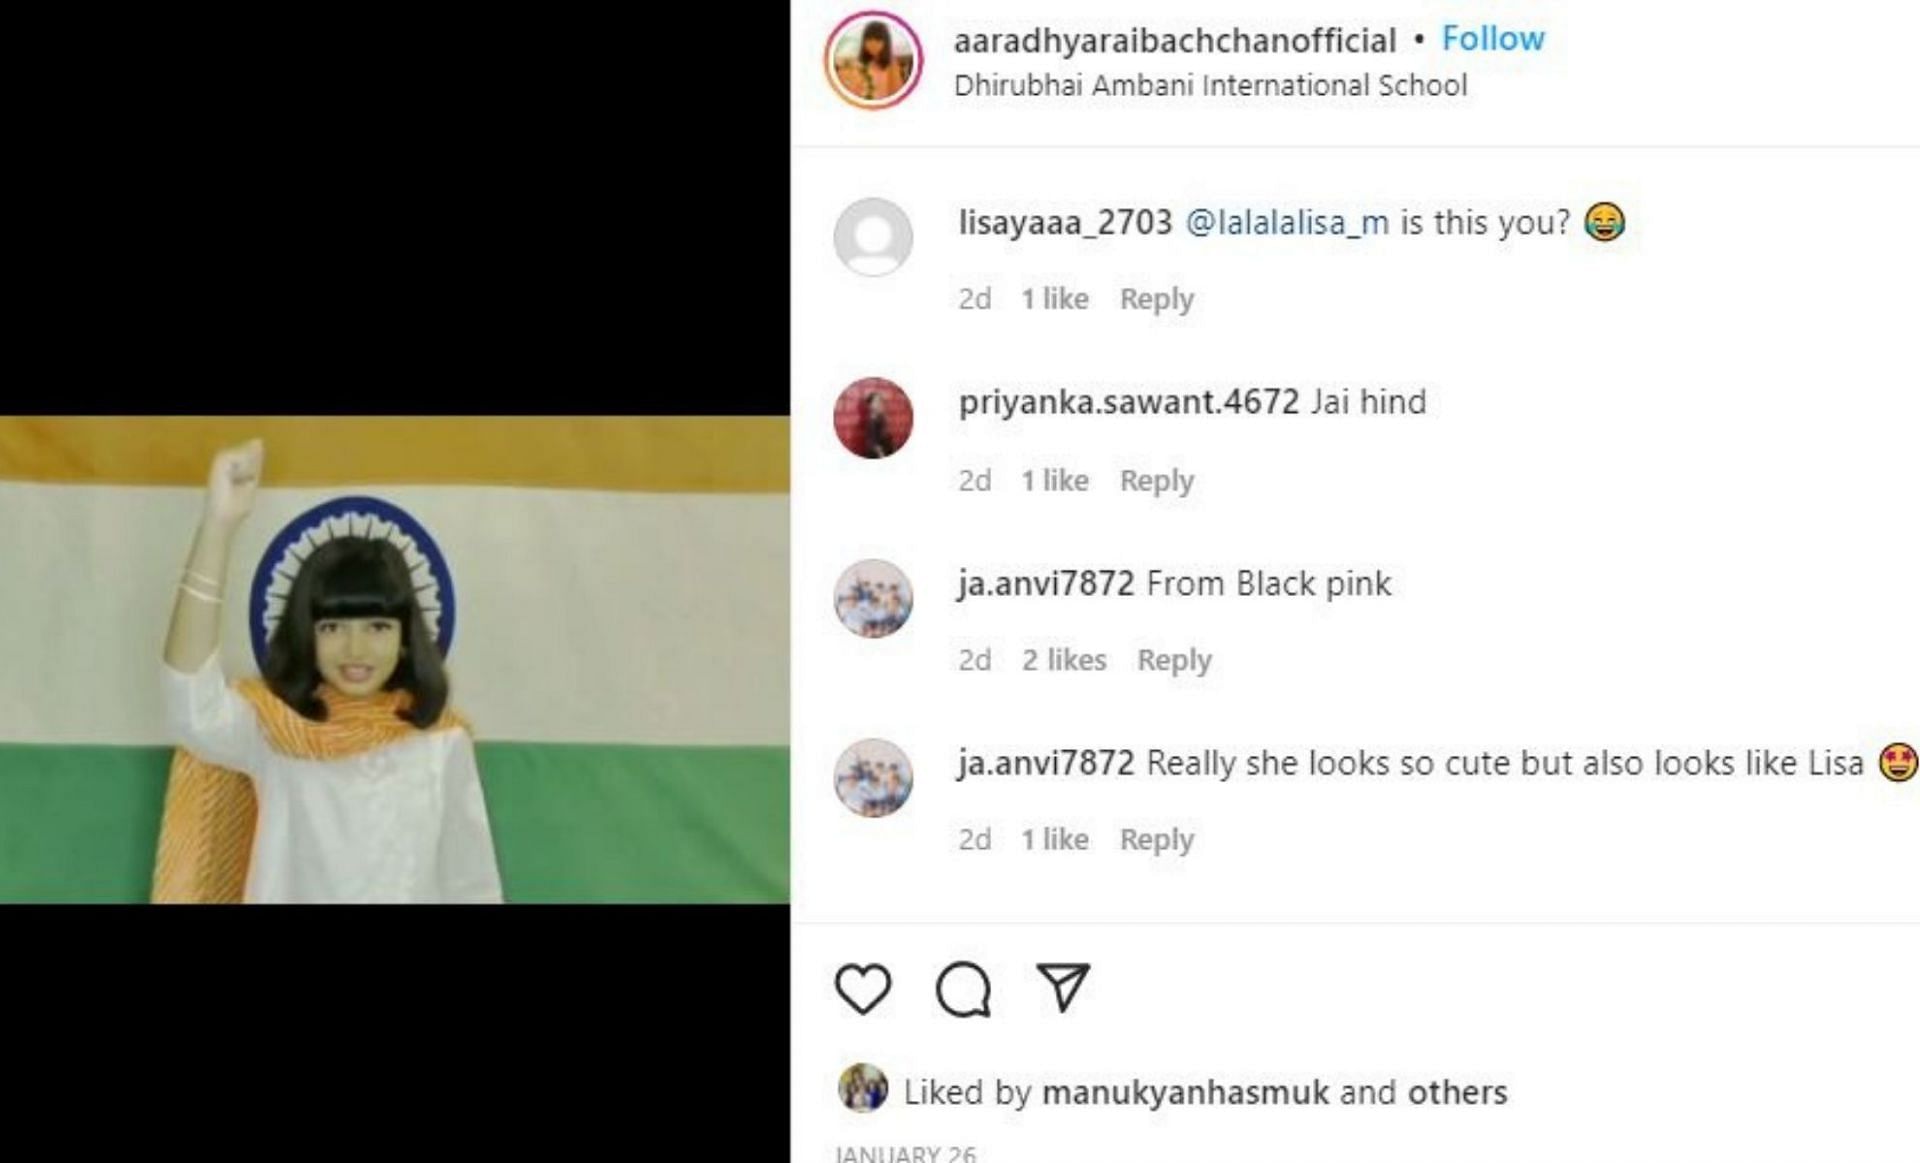 Comments under the post (Screenshot via @aaradhyaraibachchanofficial/Instagram)